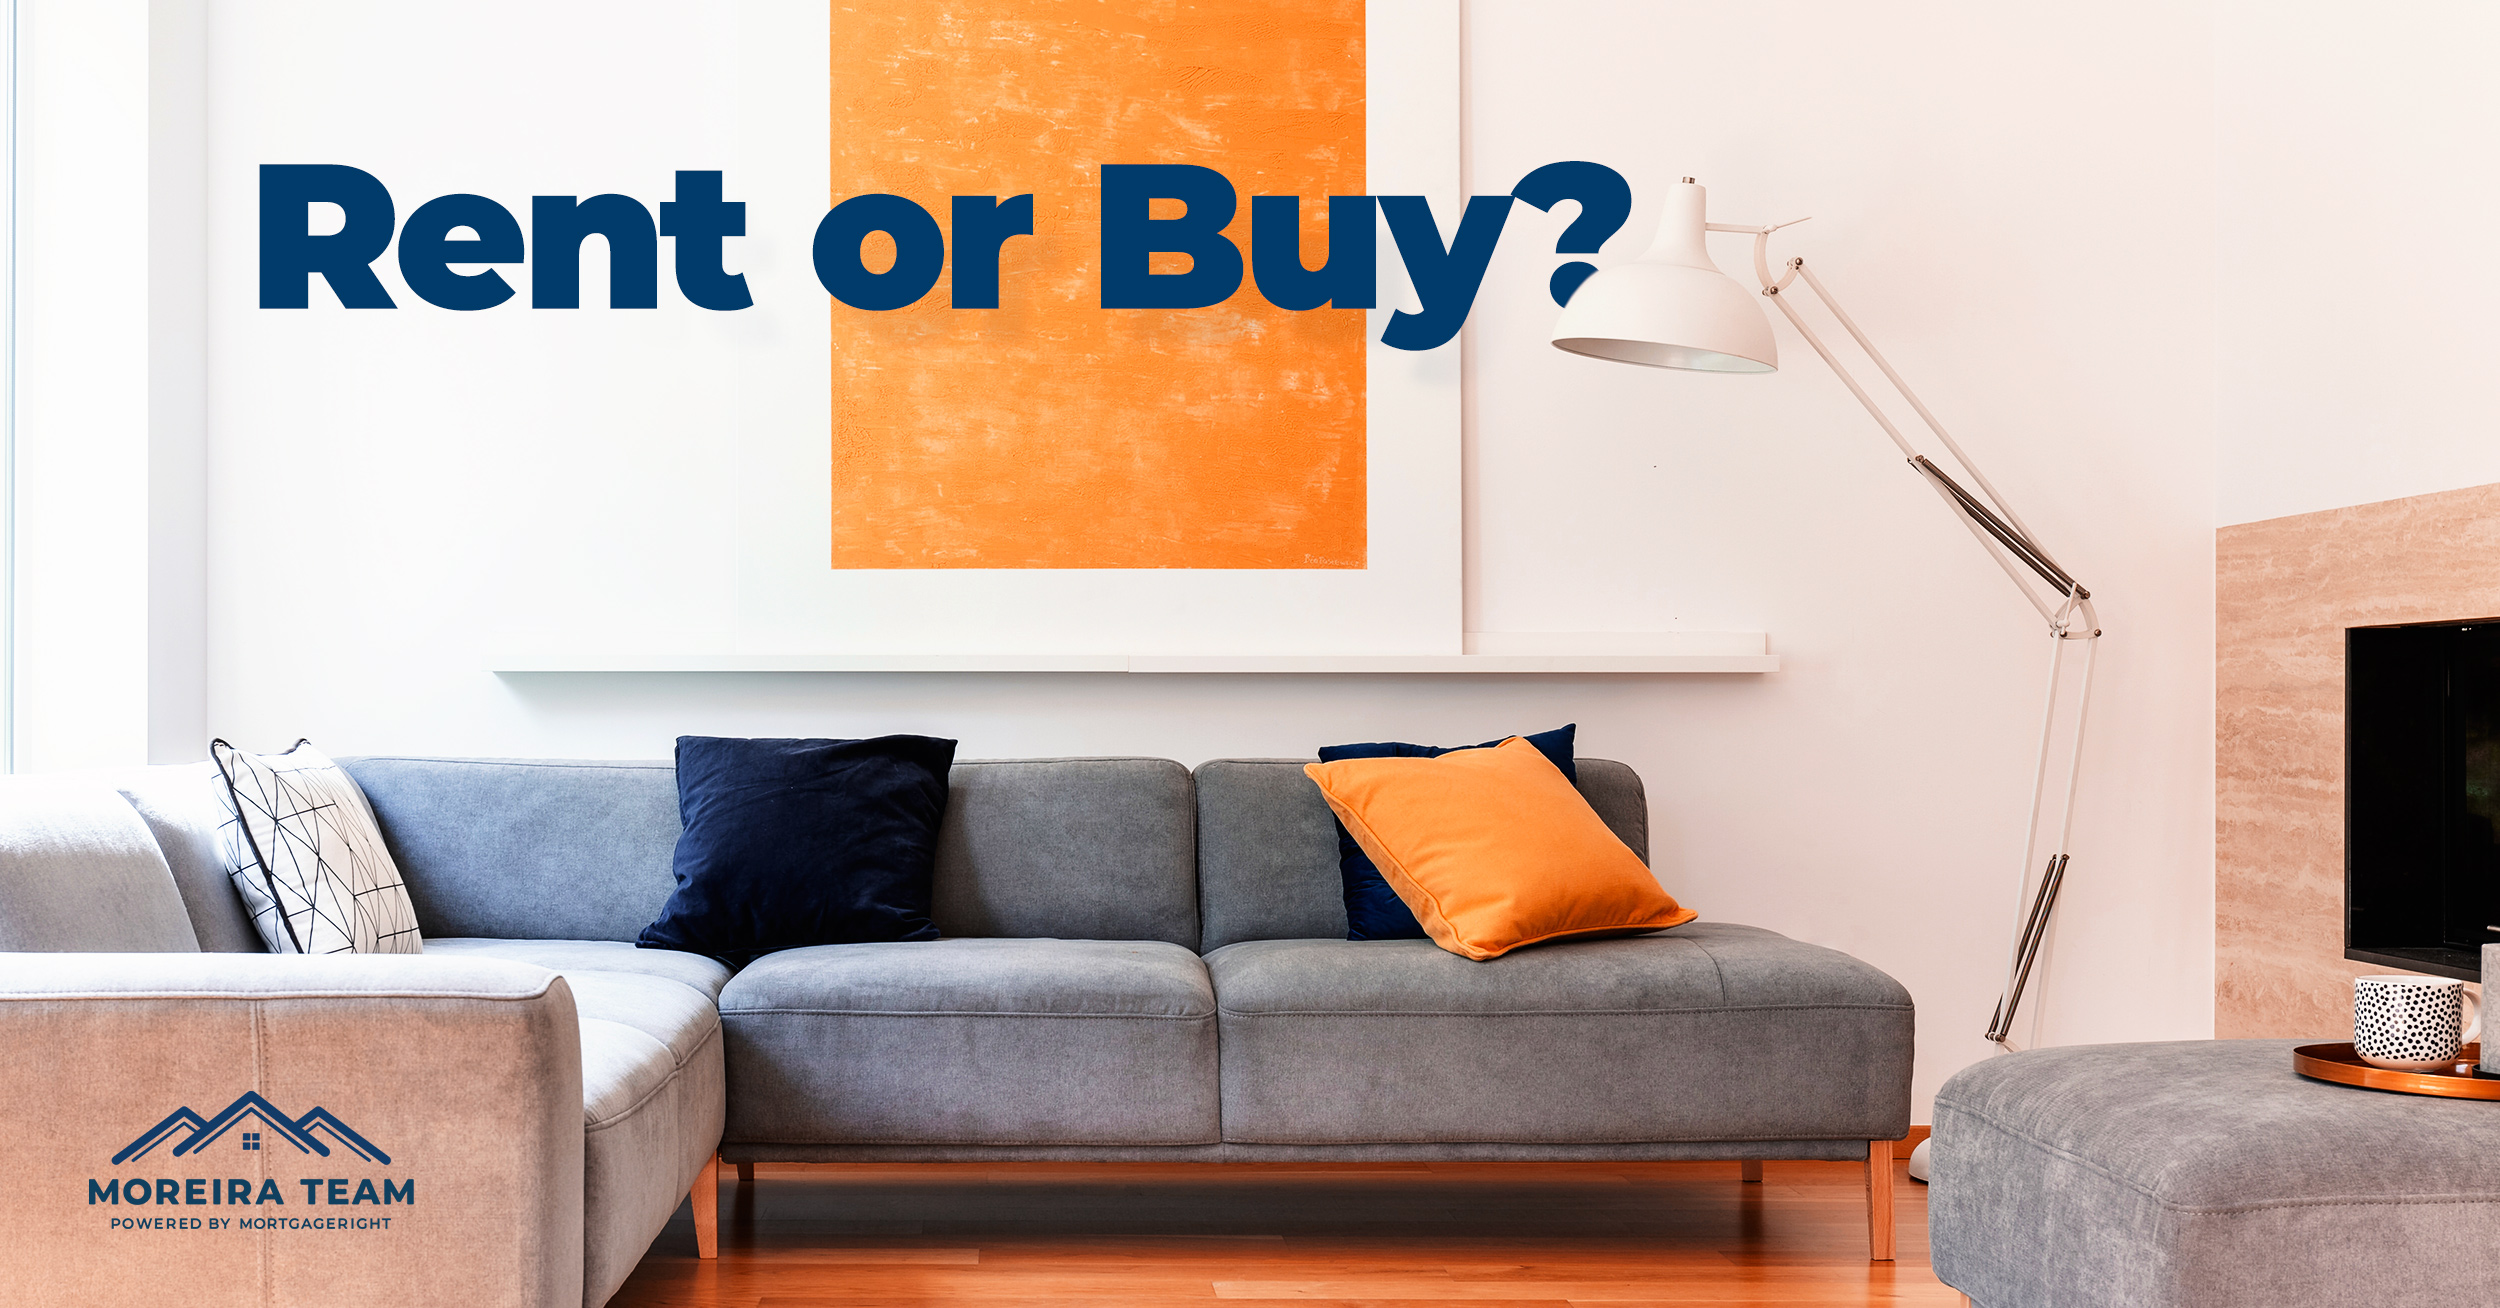 How Does Purchasing a Home Compare with Renting?